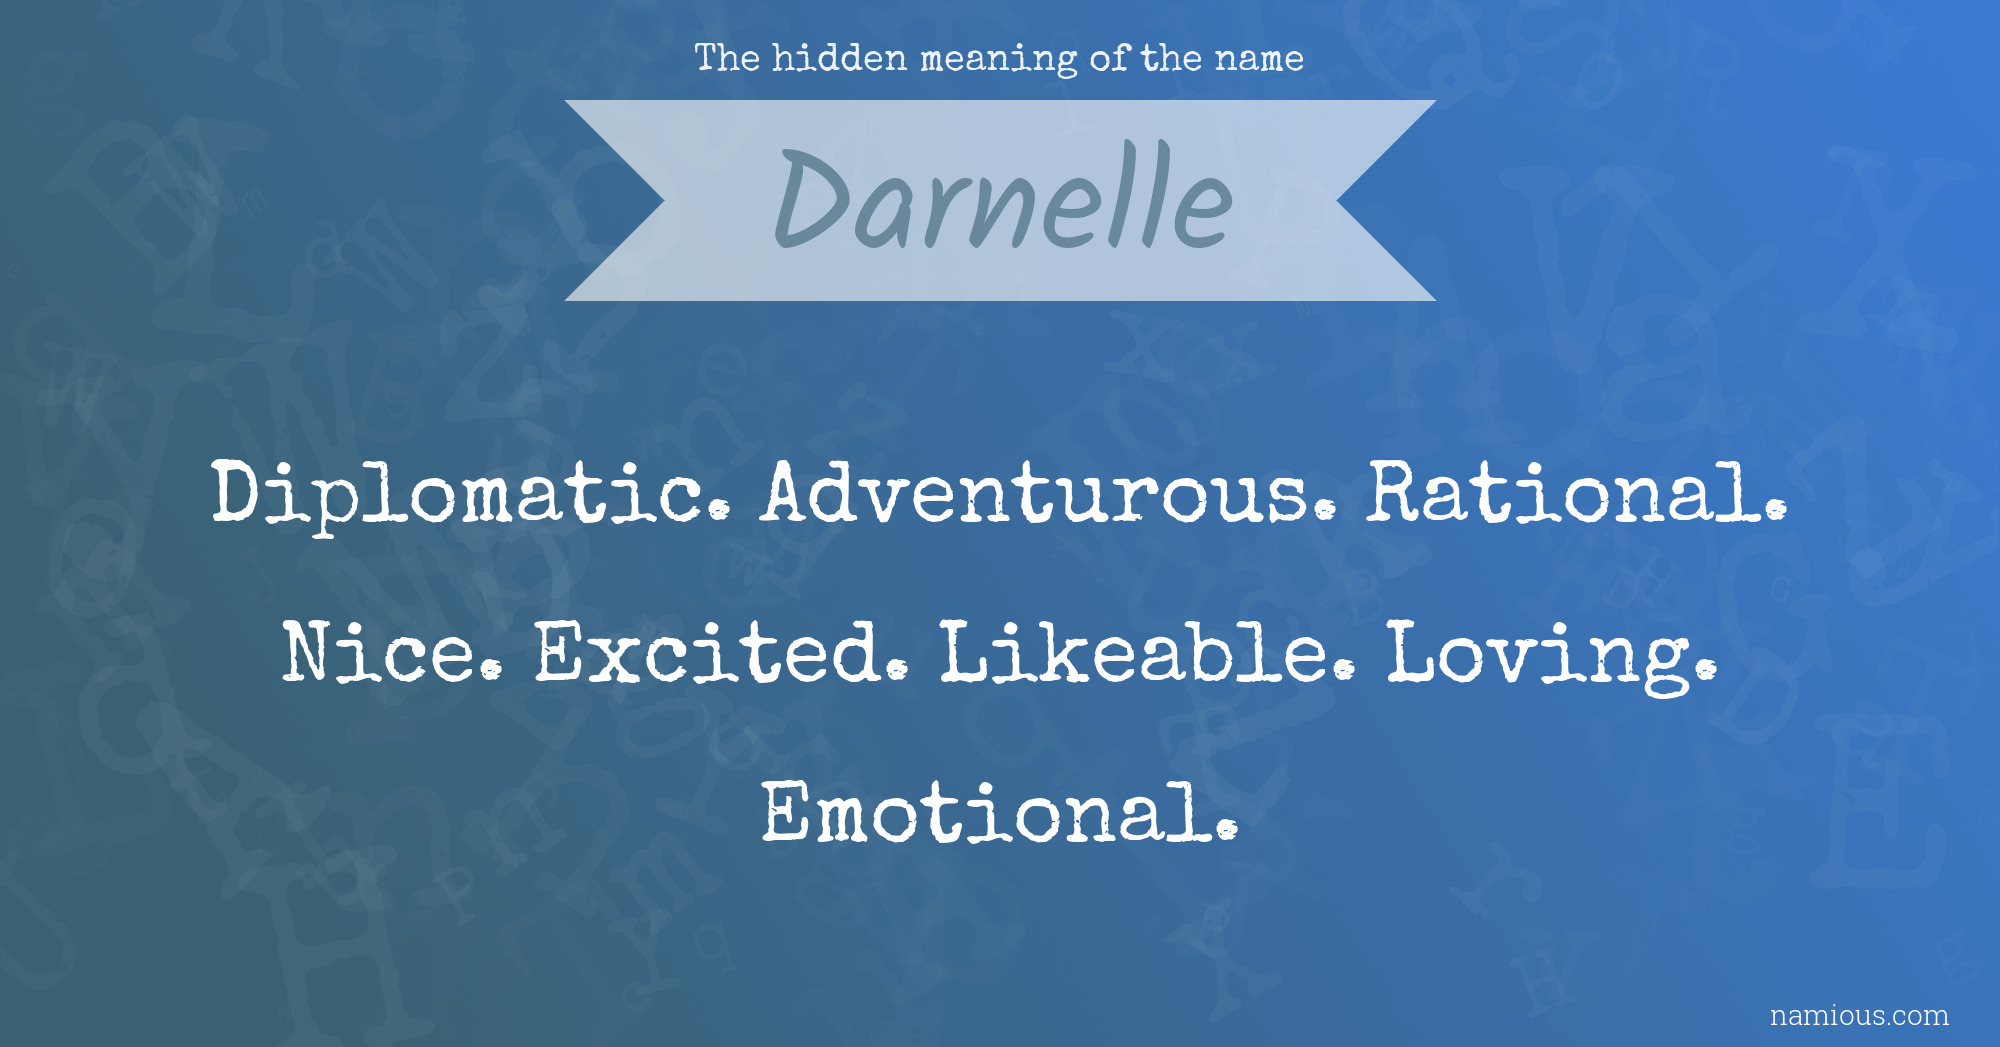 The hidden meaning of the name Darnelle